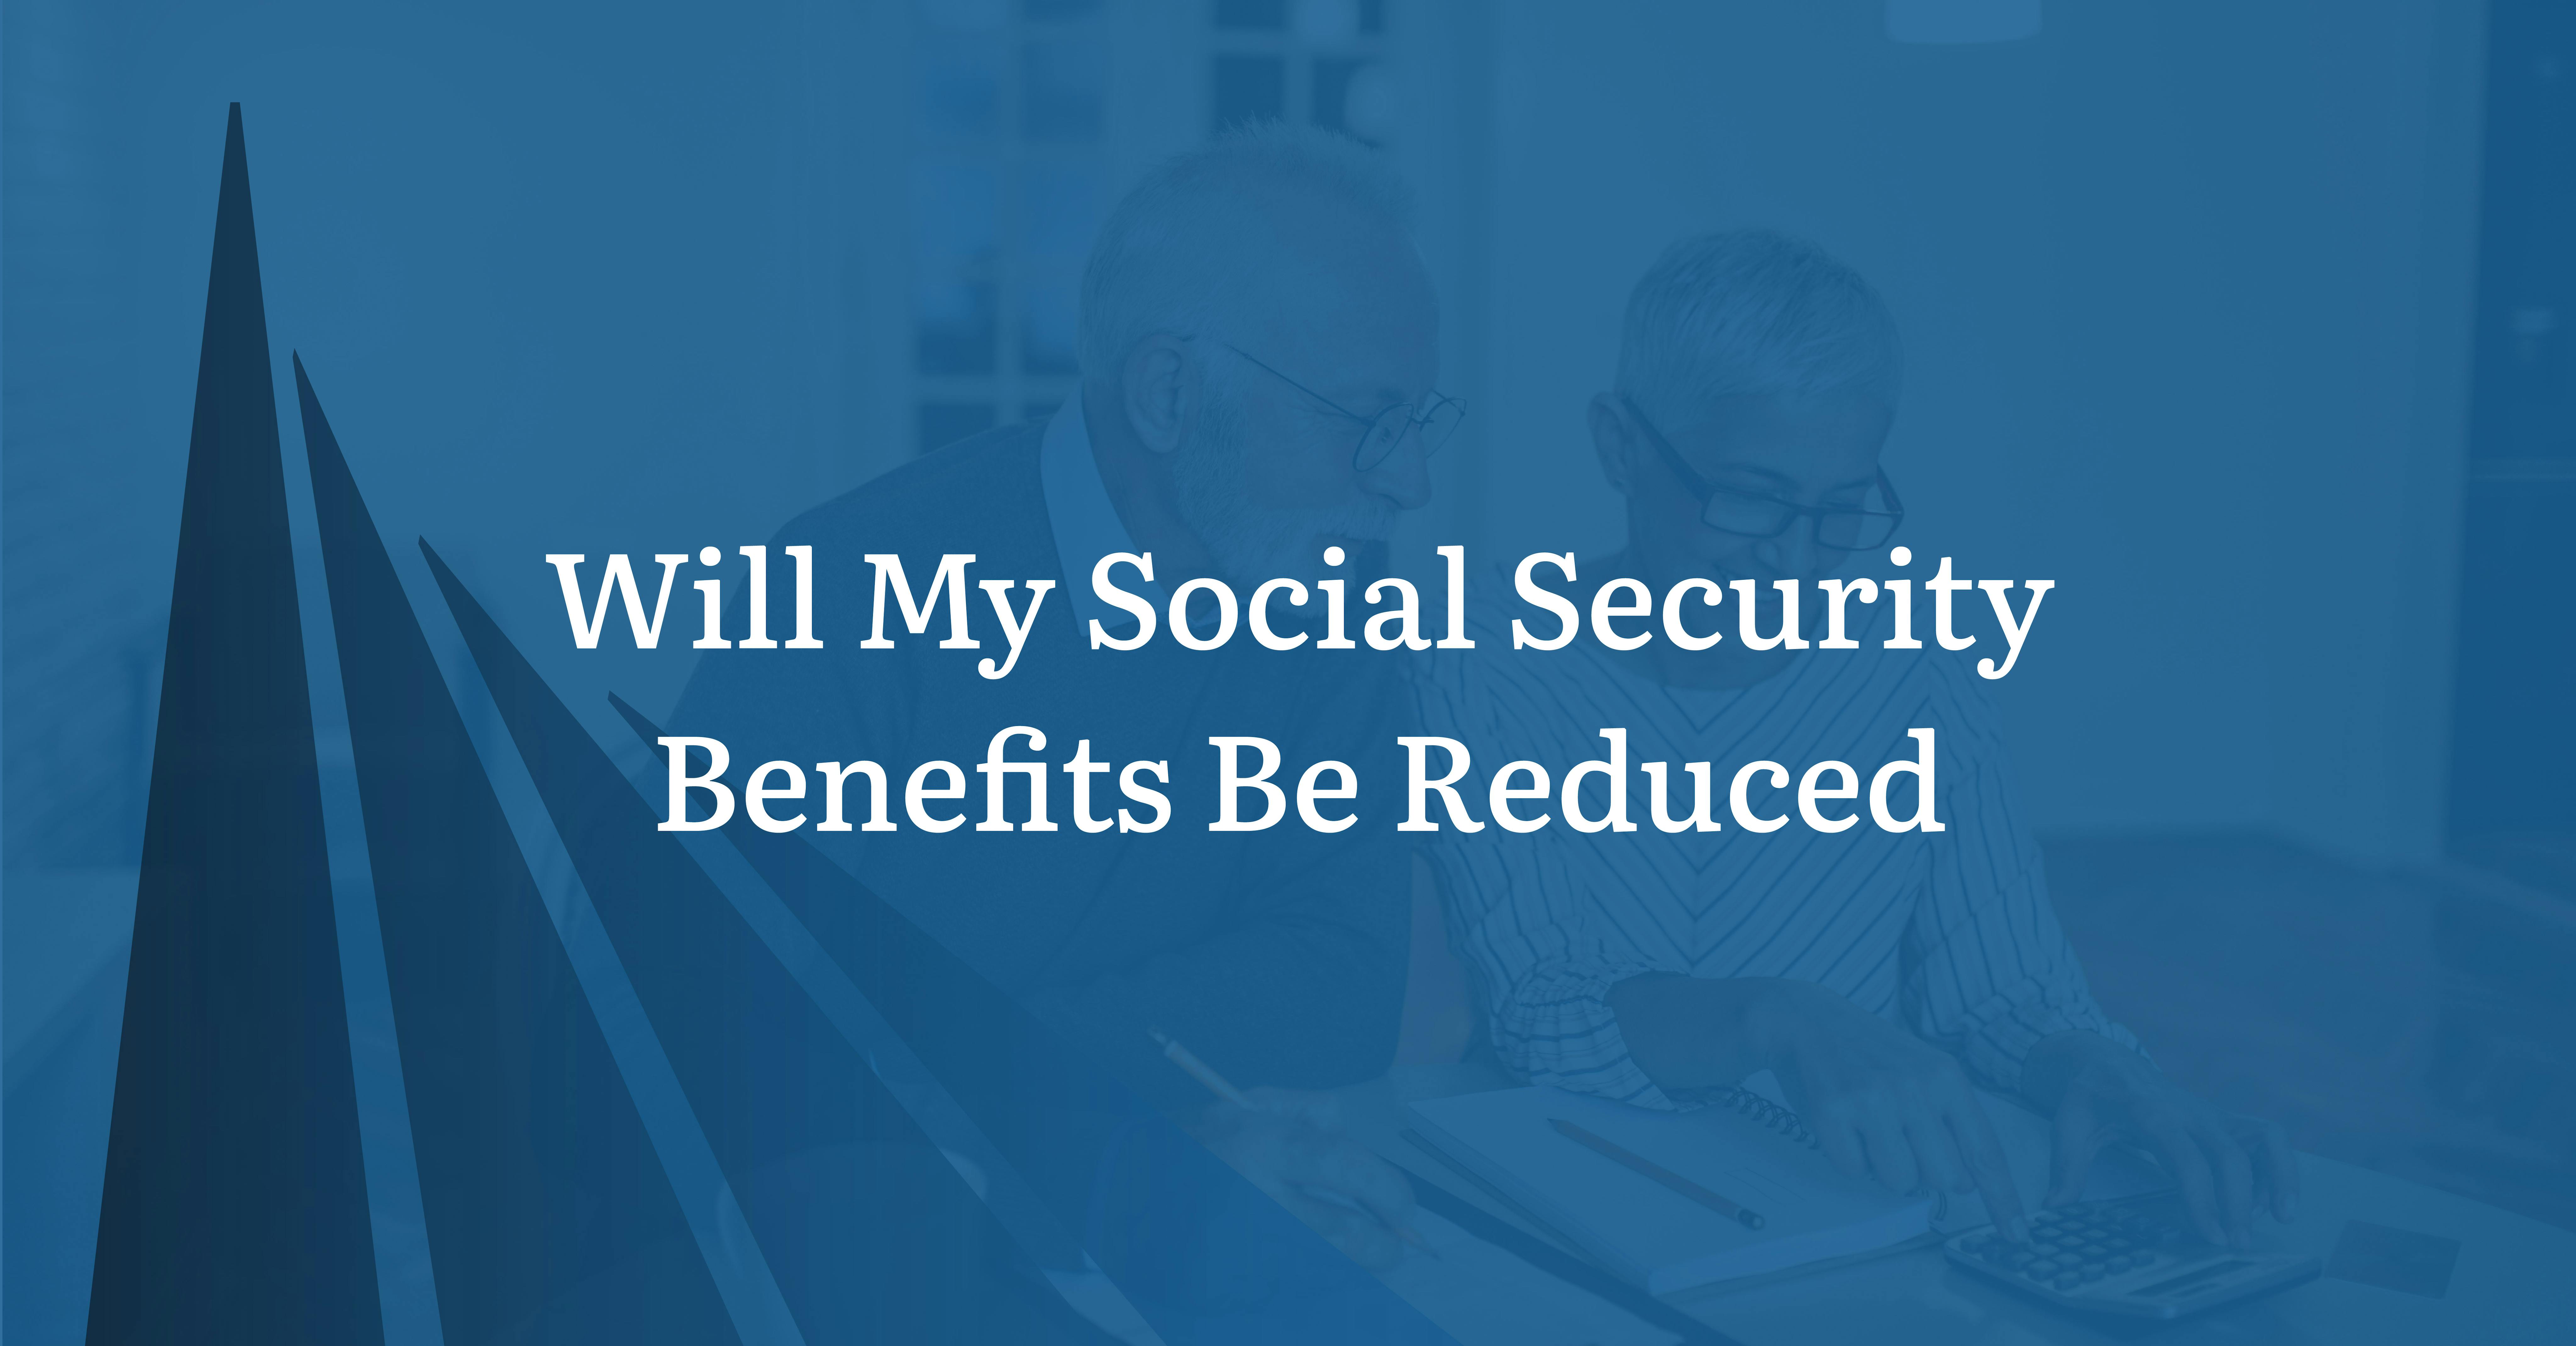 Will My Social Security Benefits Be Reduced